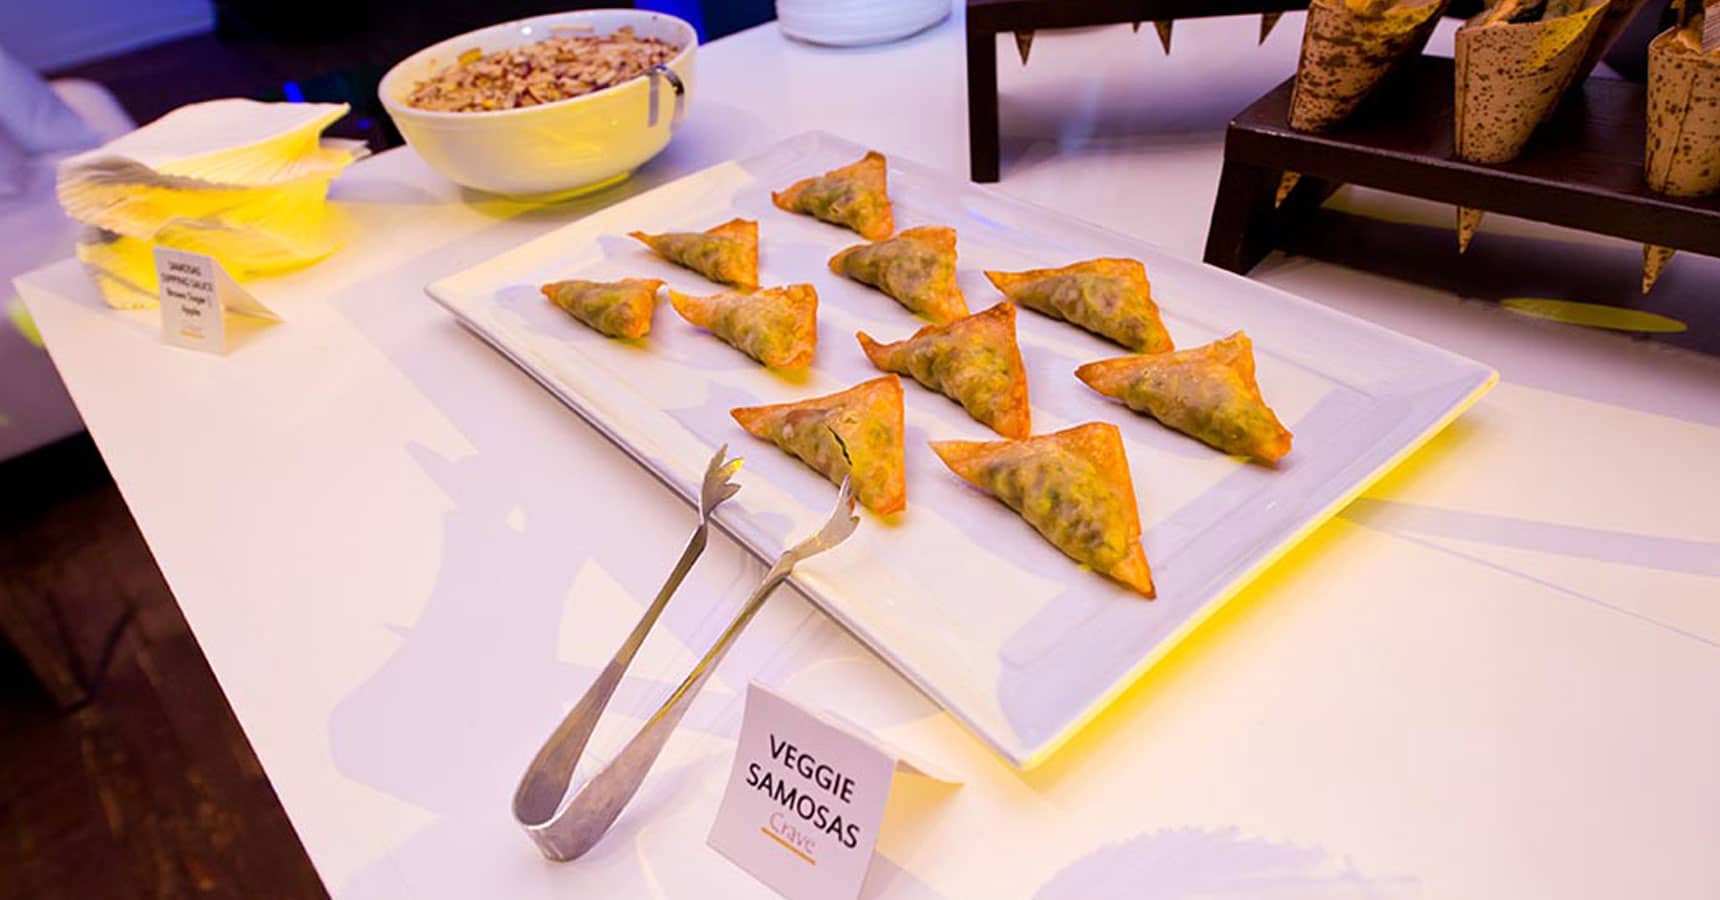 Veggie Samosas by Crave Catering